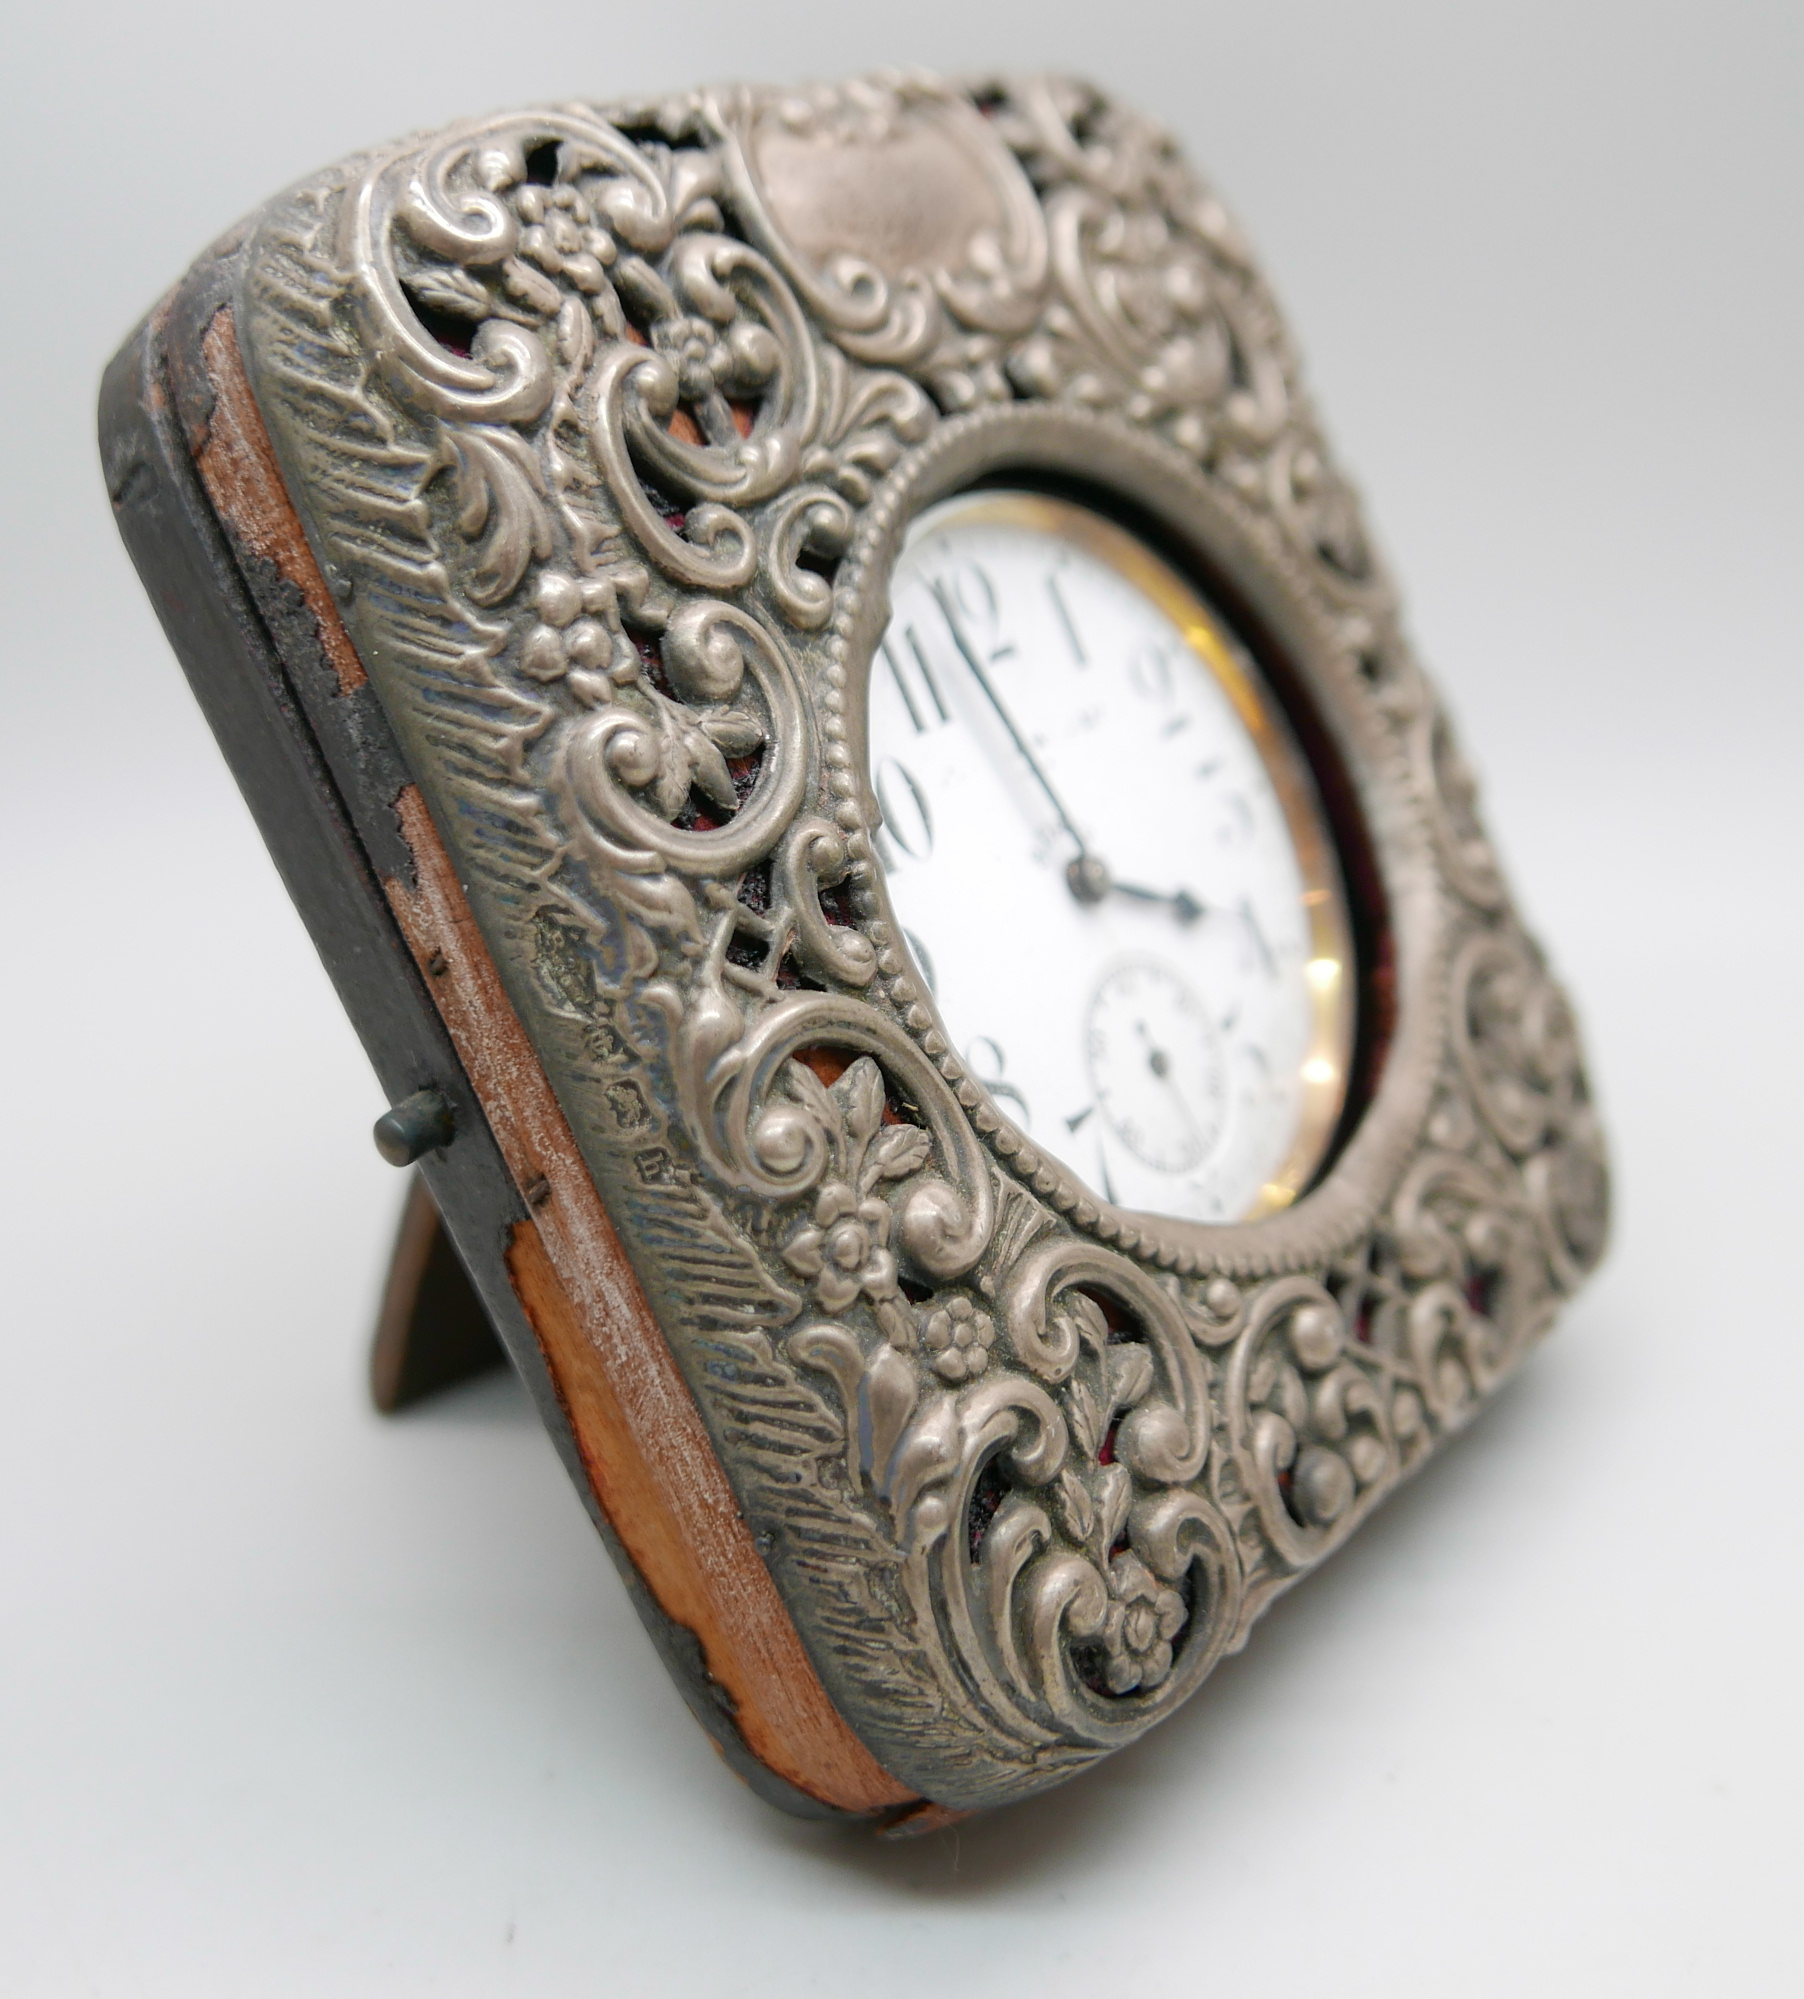 A silver travel clock case with Goliath top-wind 8-Days watch, Birmingham 1907 - Image 3 of 5